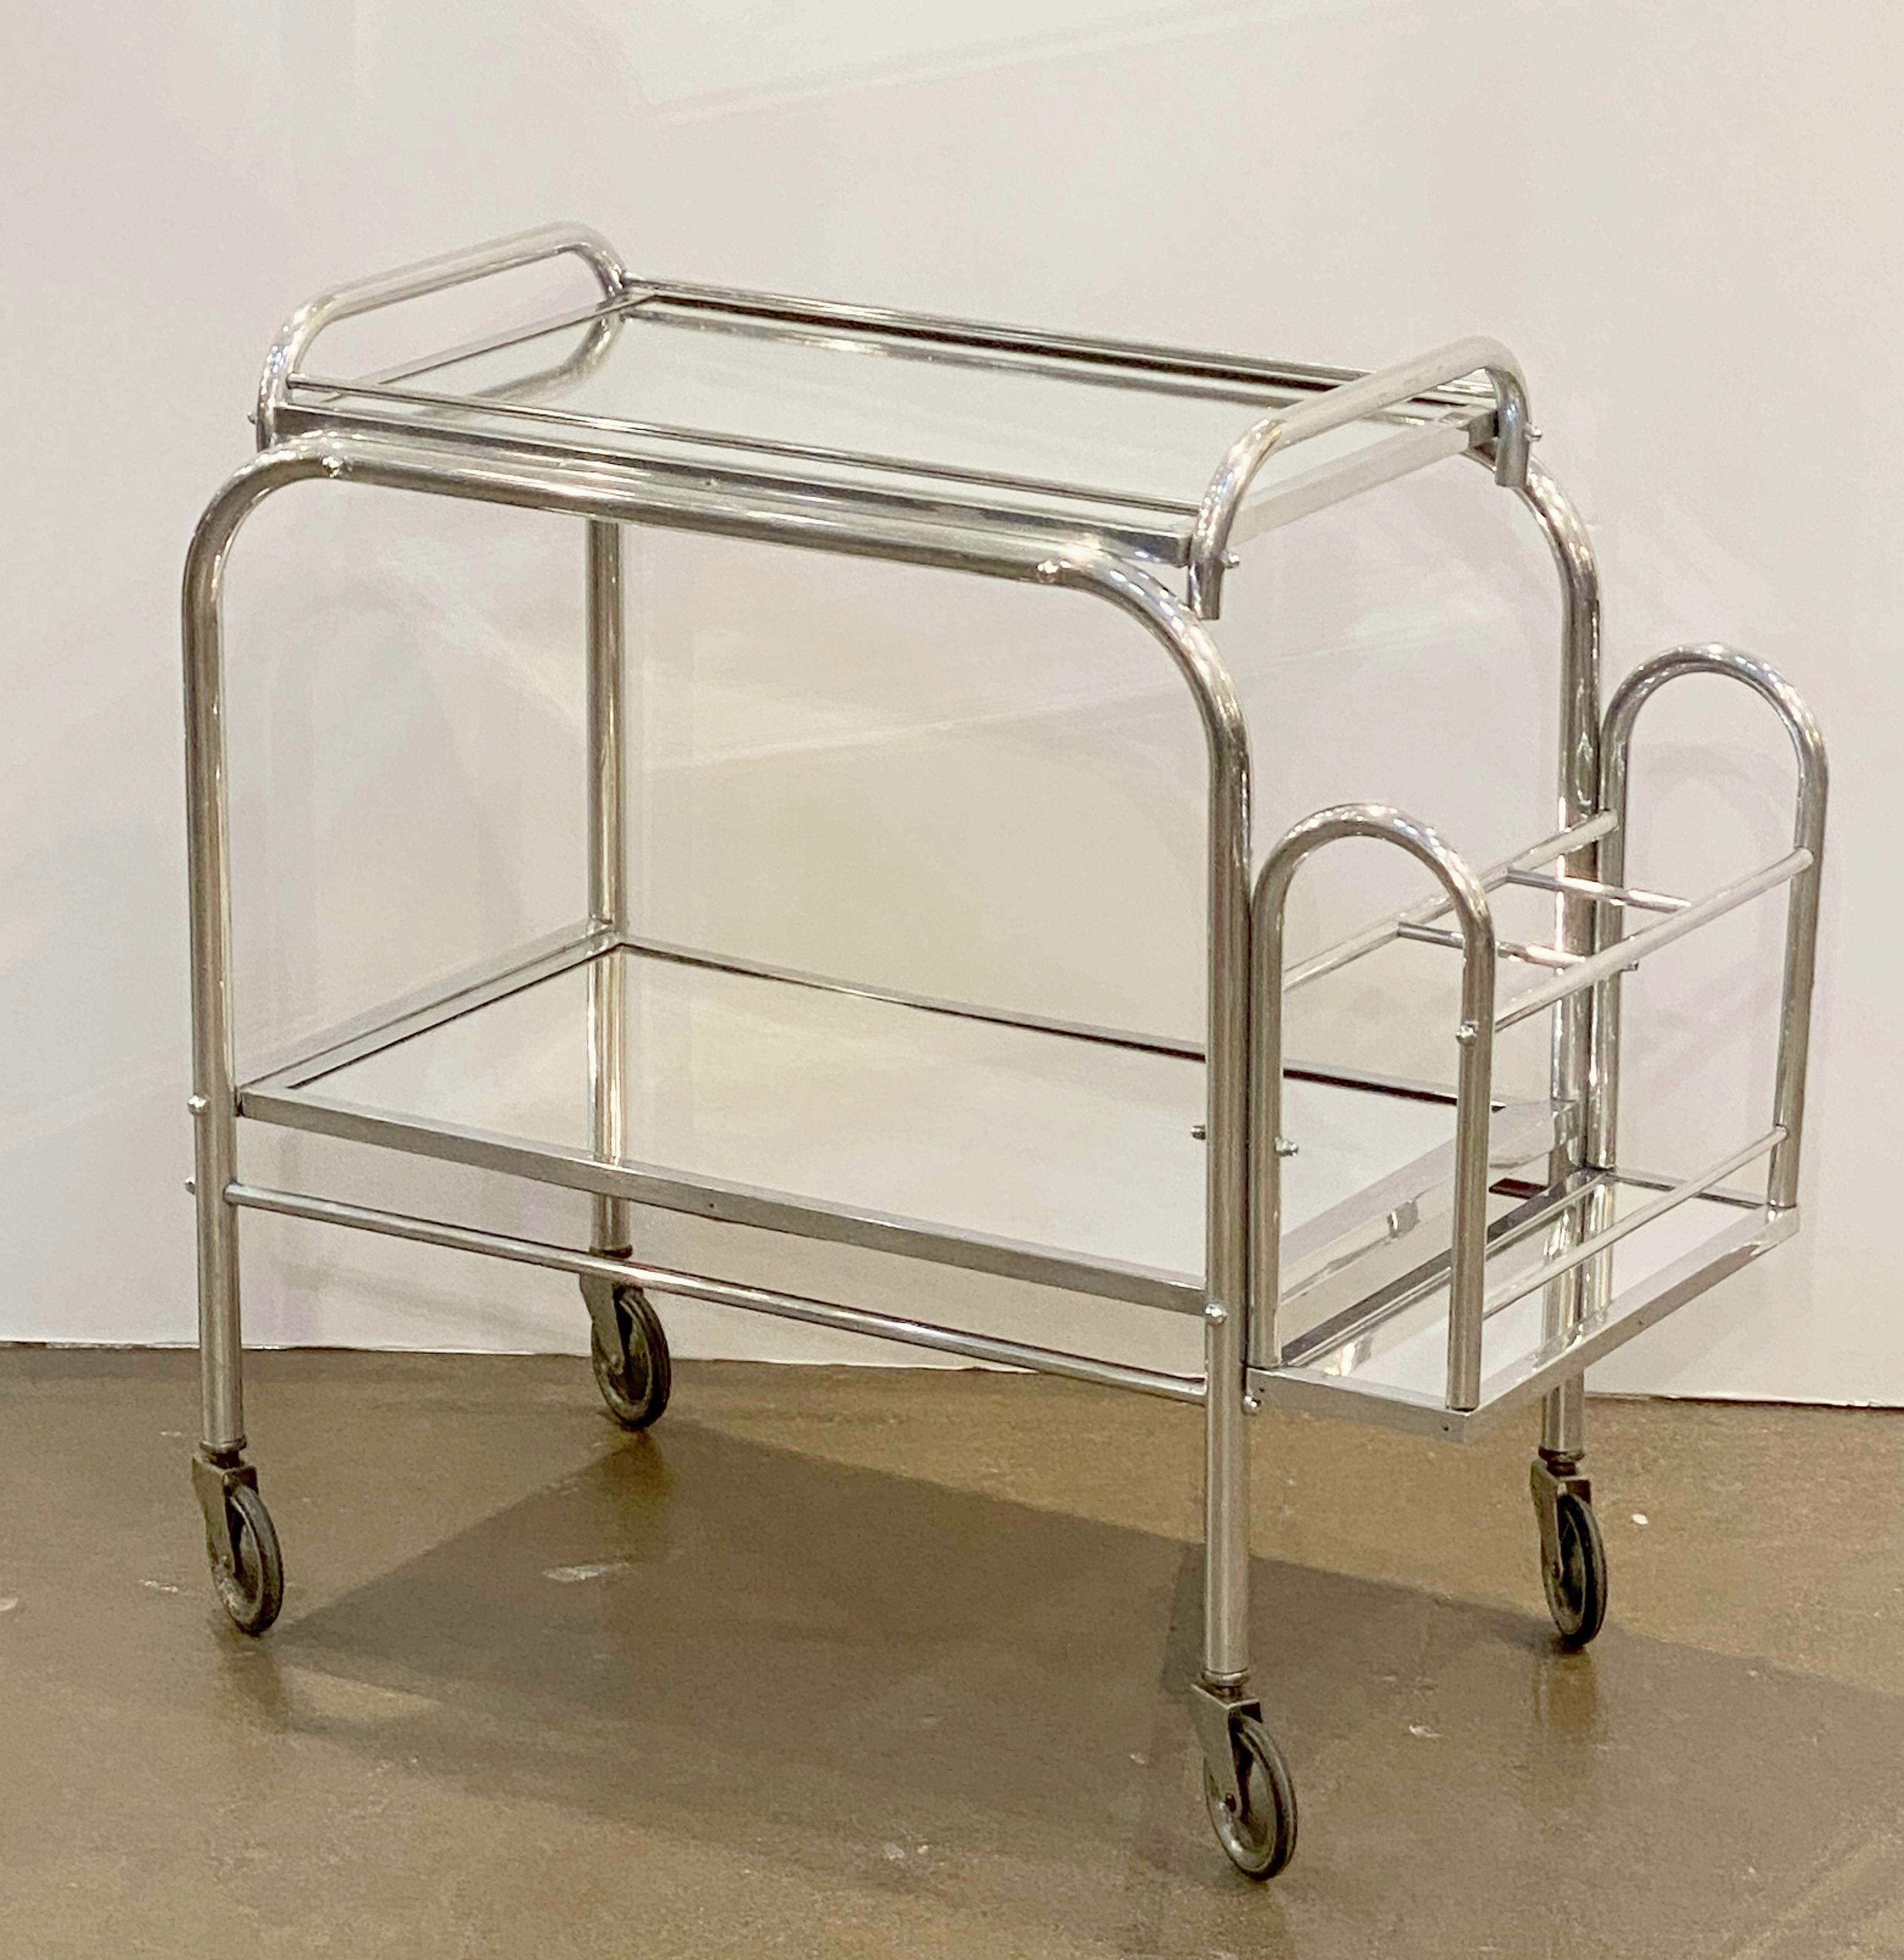 A fine English Art Deco era bar cart or drinks cart of brushed aluminum, featuring two rectangular mirrored glass tiers on stylish brushed aluminum mounts, and resting on vintage rolling casters. With removable top serving or drinks tray.